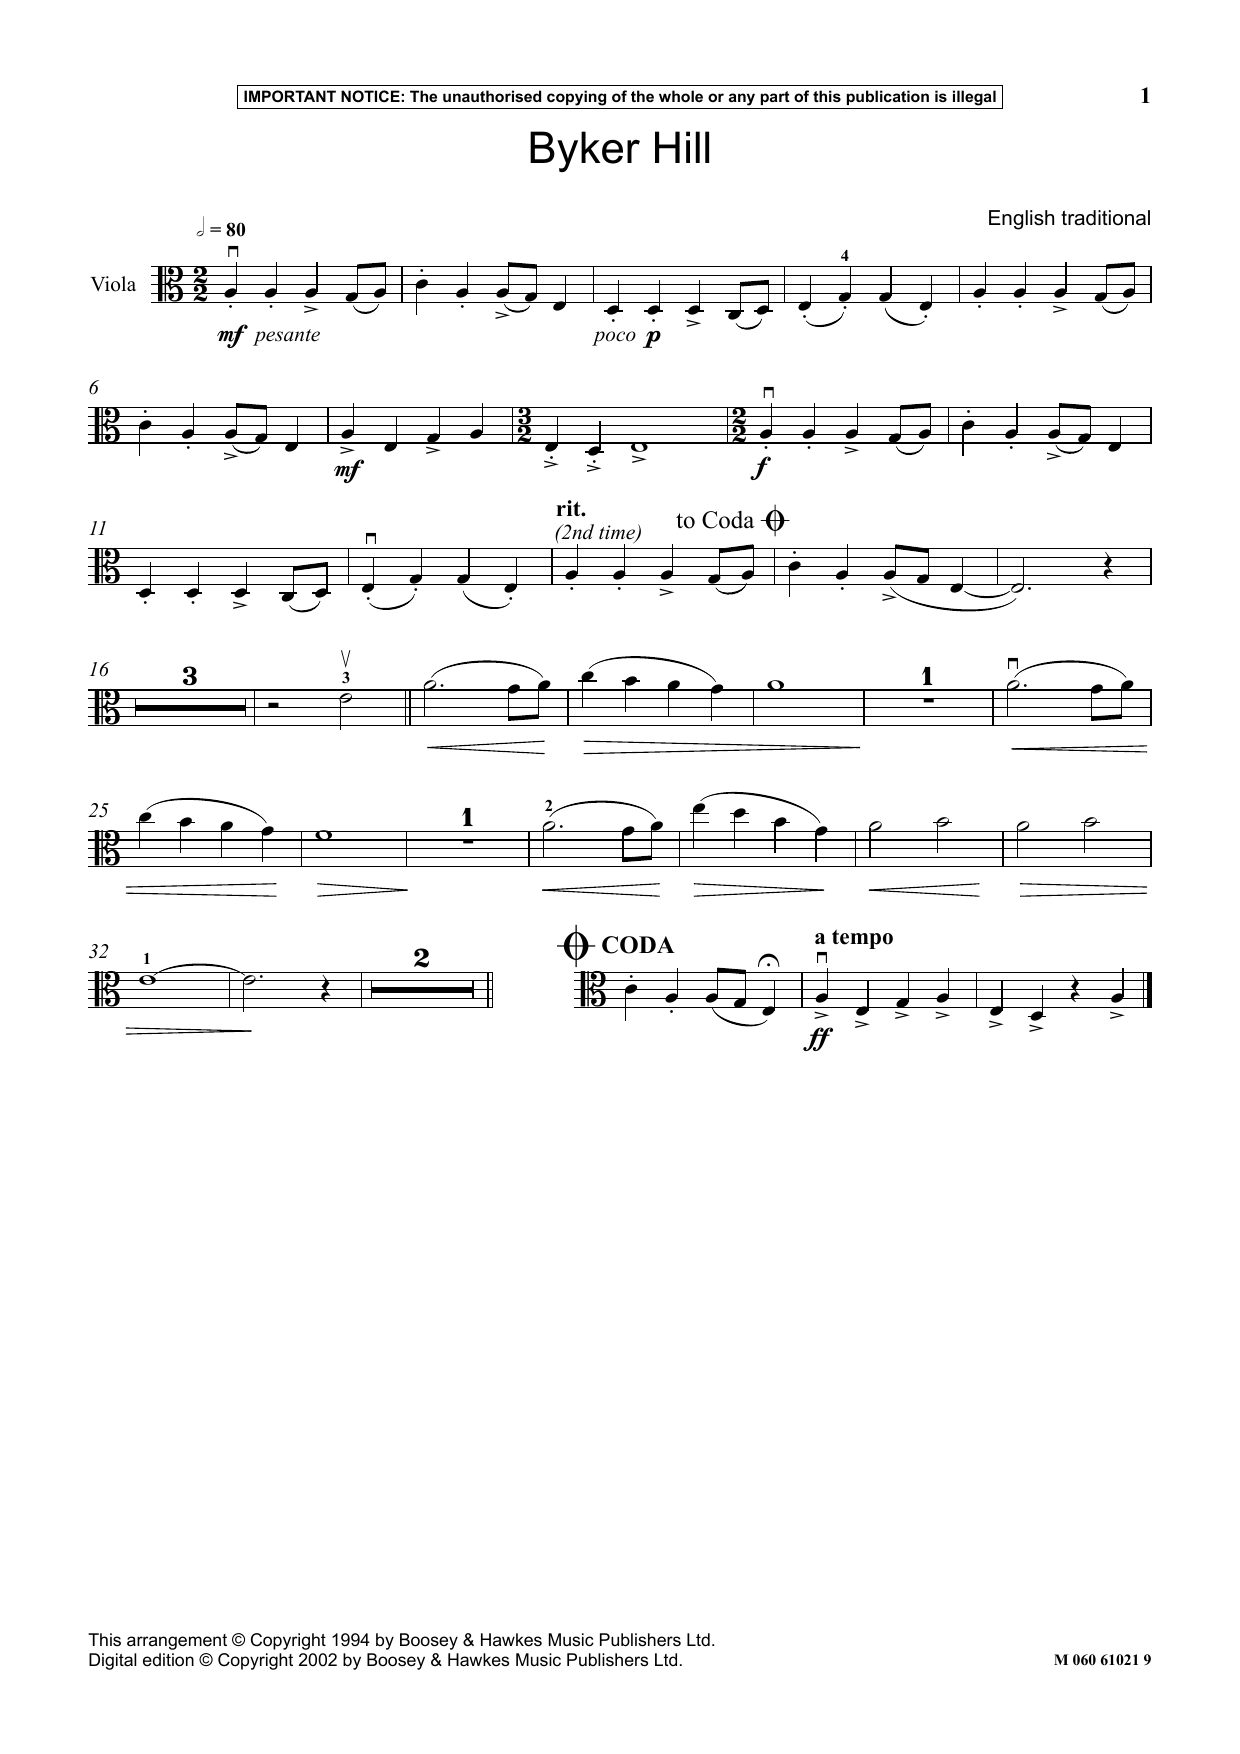 Download English Traditional Byker Hill Sheet Music